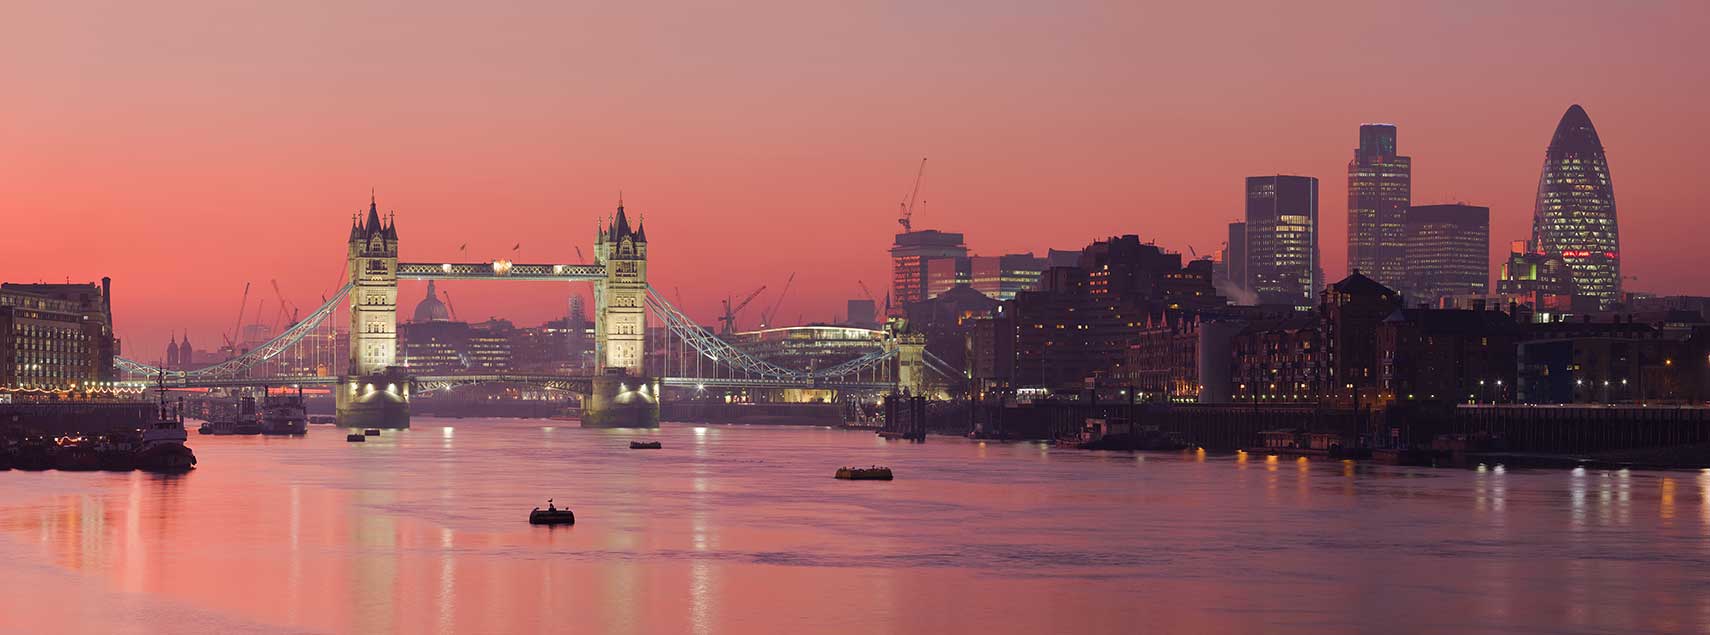 Skyline of UK's capital, seen from Bermondsey banks of the Thames with the Tower Bridge, London, UK